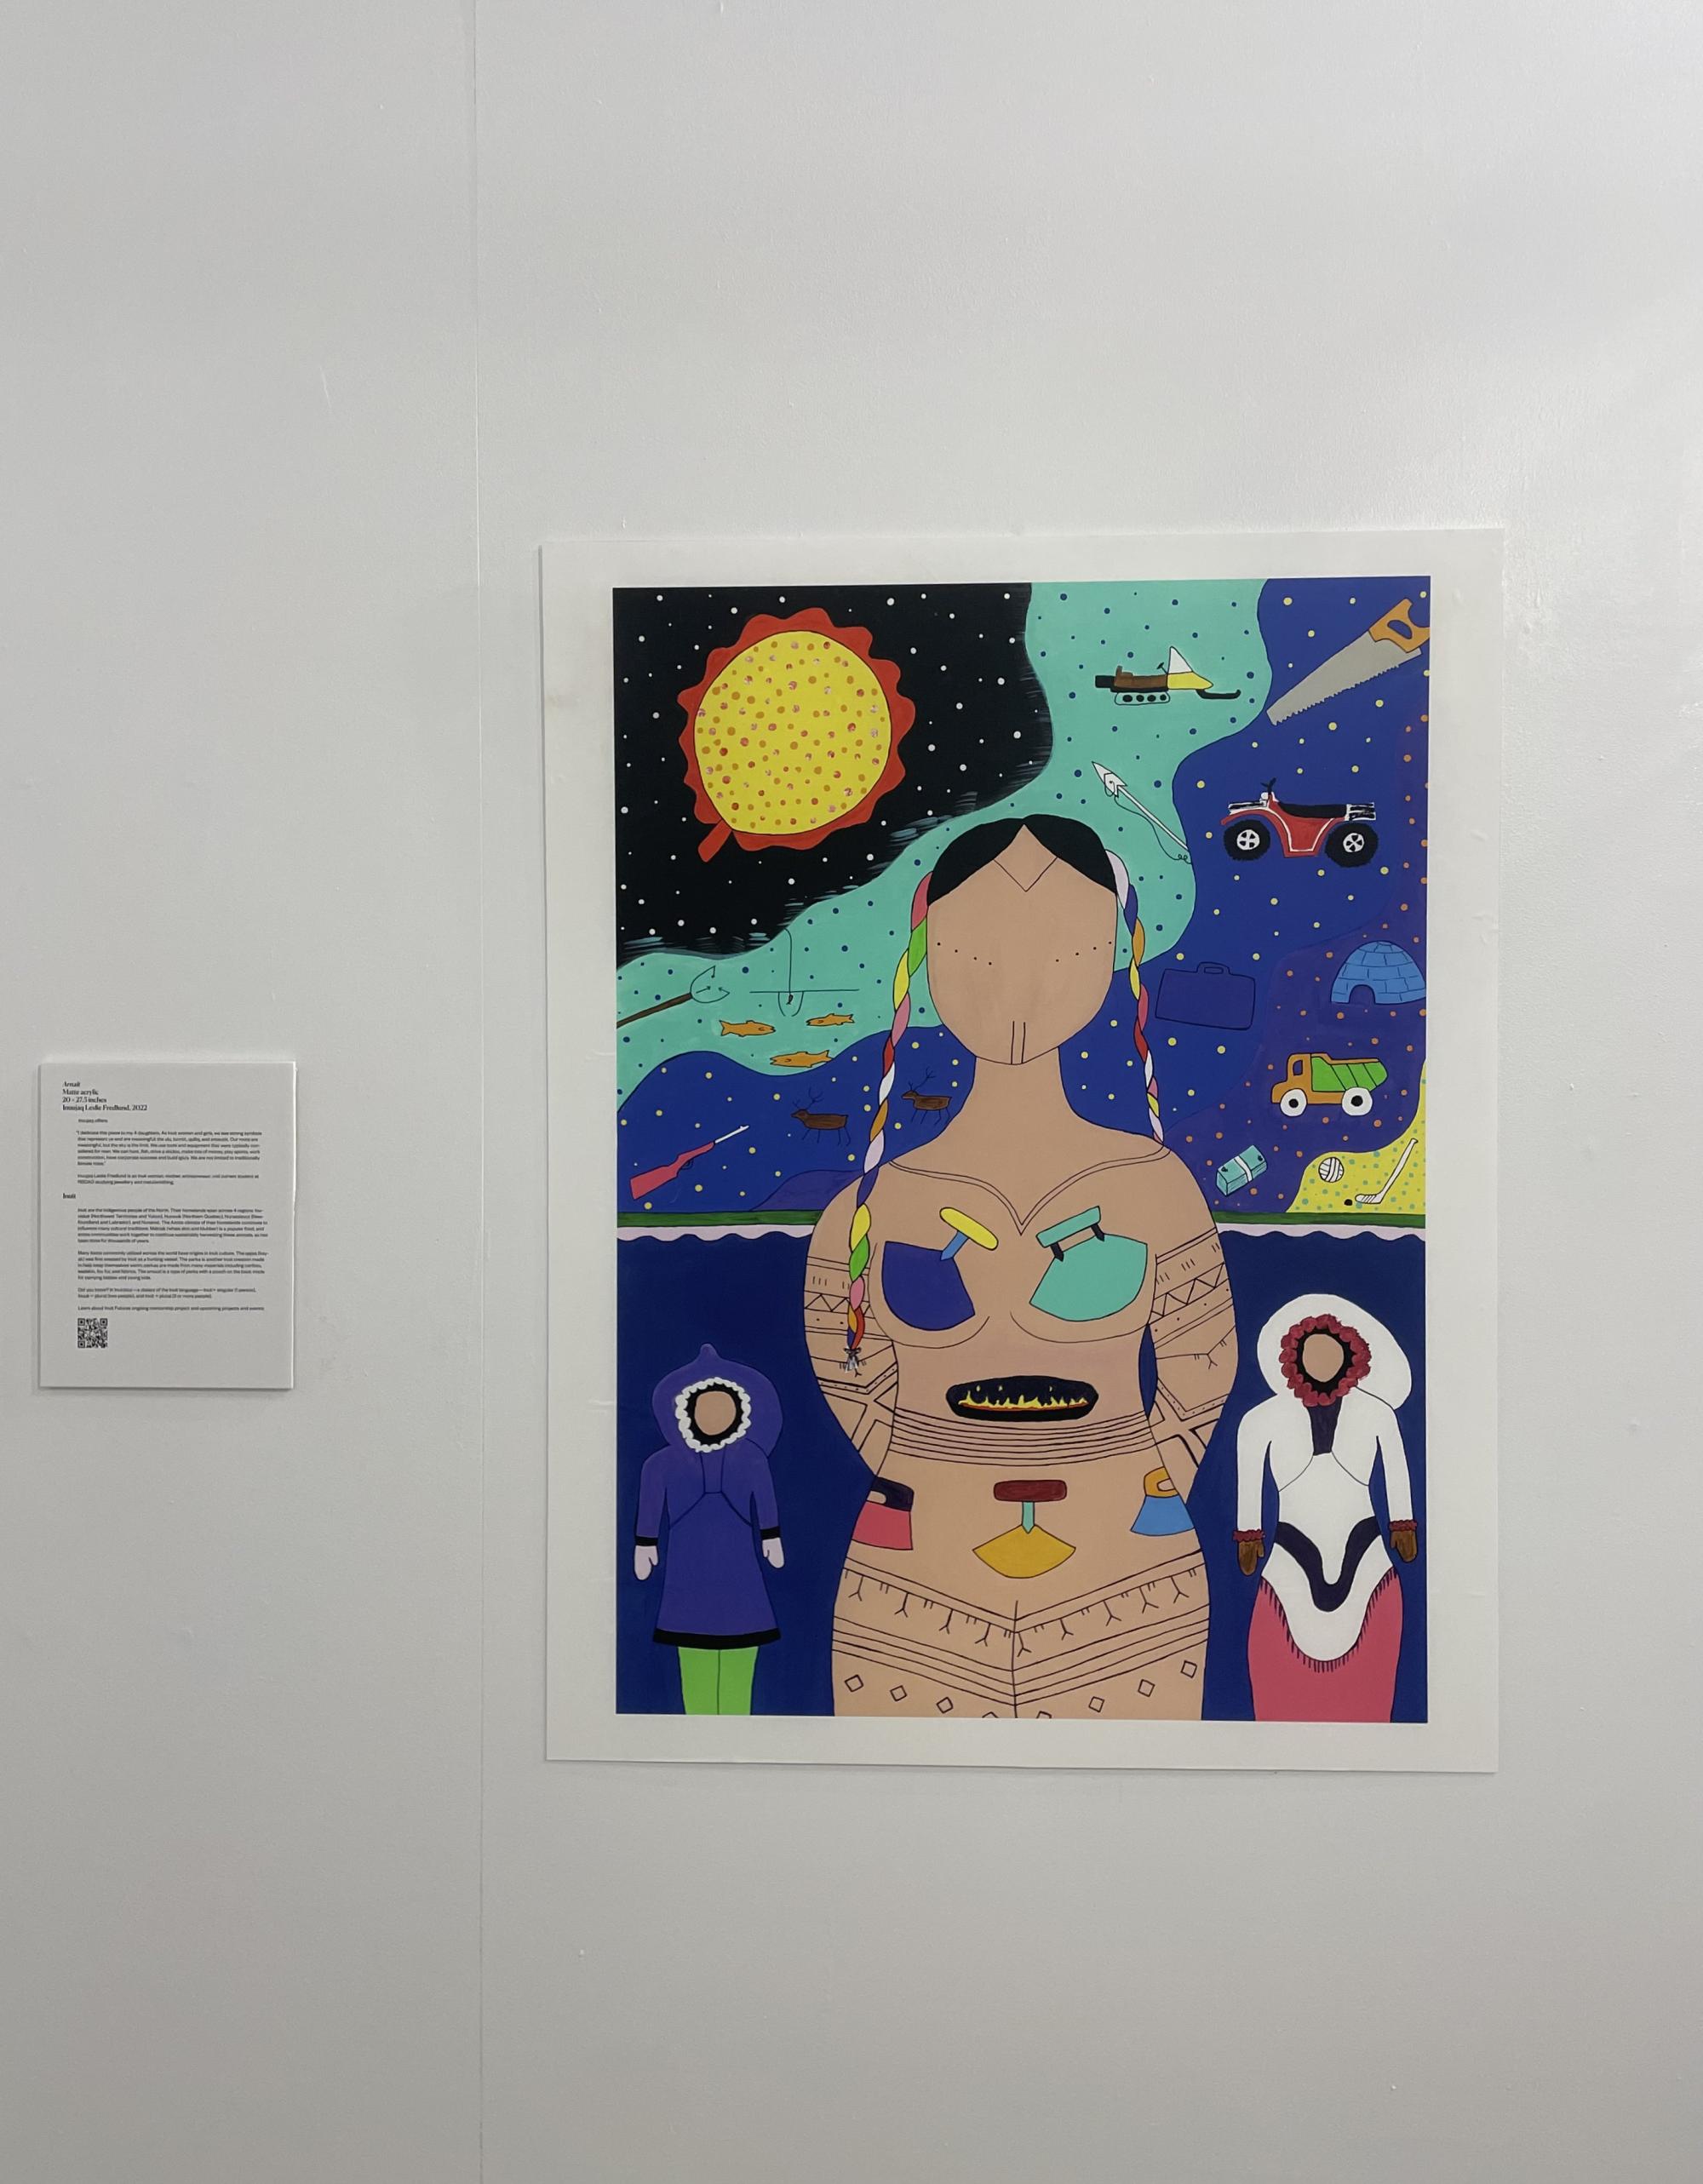 [ID: "Matte acrylic paint on paper of 3 female figures in the foreground wearing and displaying various Inuit symbols and items such as uluit and amautiit. The sky in the background is teal, purple, blue, black, and yellow with many illustrations including a 4-wheeler, igloo, and saw."]